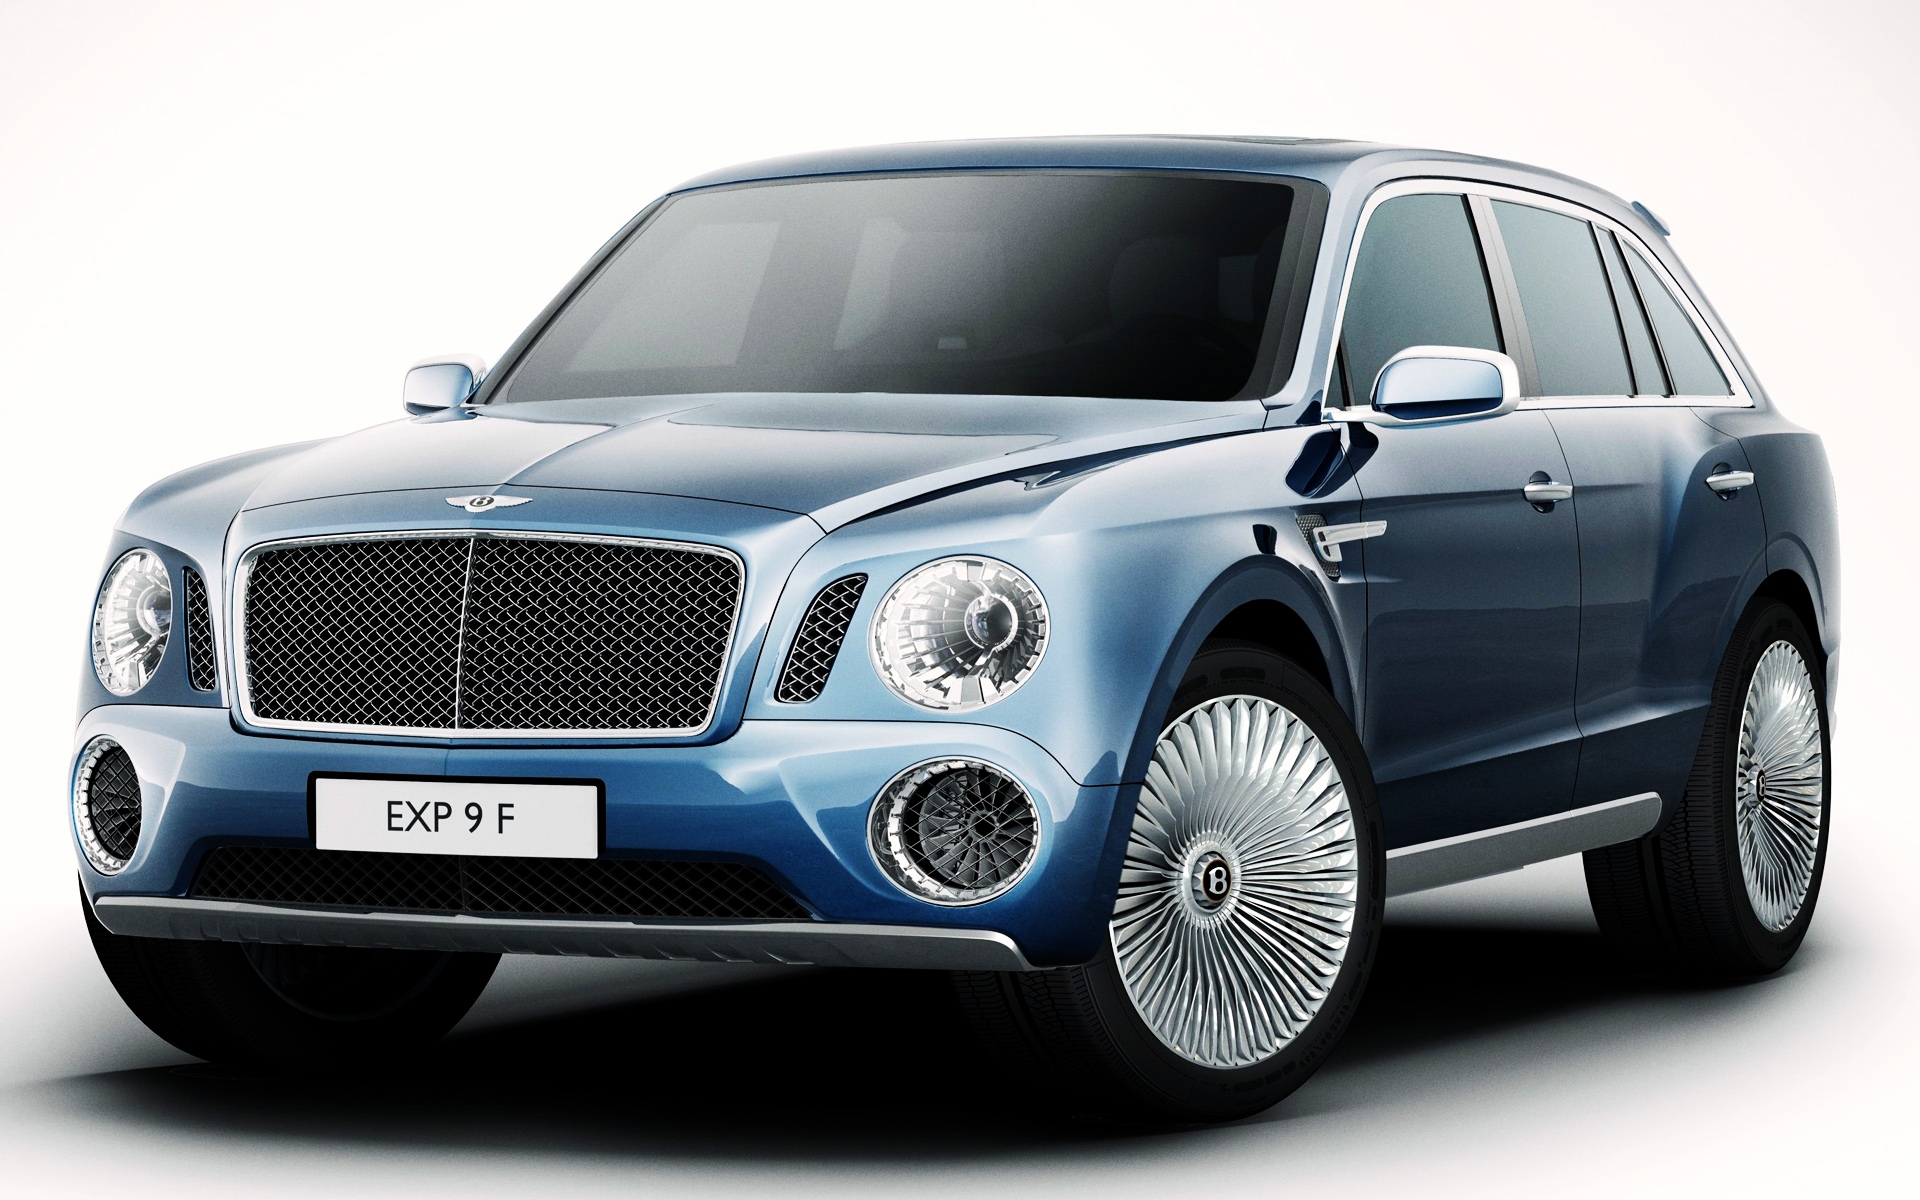 Vehicles 2012 Bentley EXP 9F SUV HD Wallpaper | Background Image